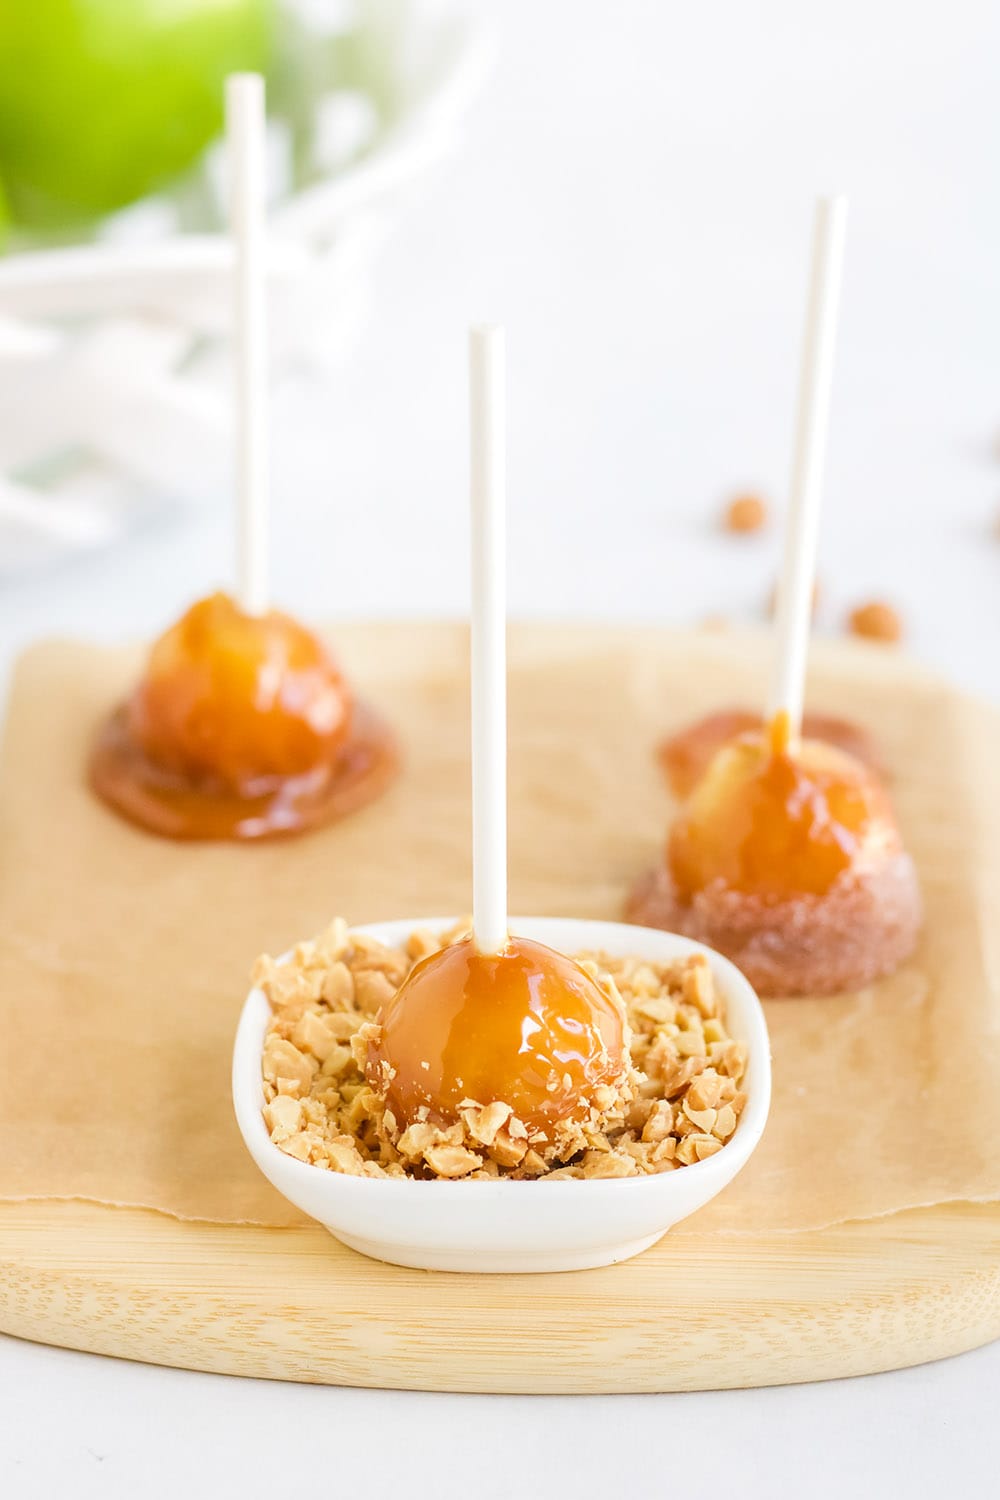 Dipping caramel apple into nuts.